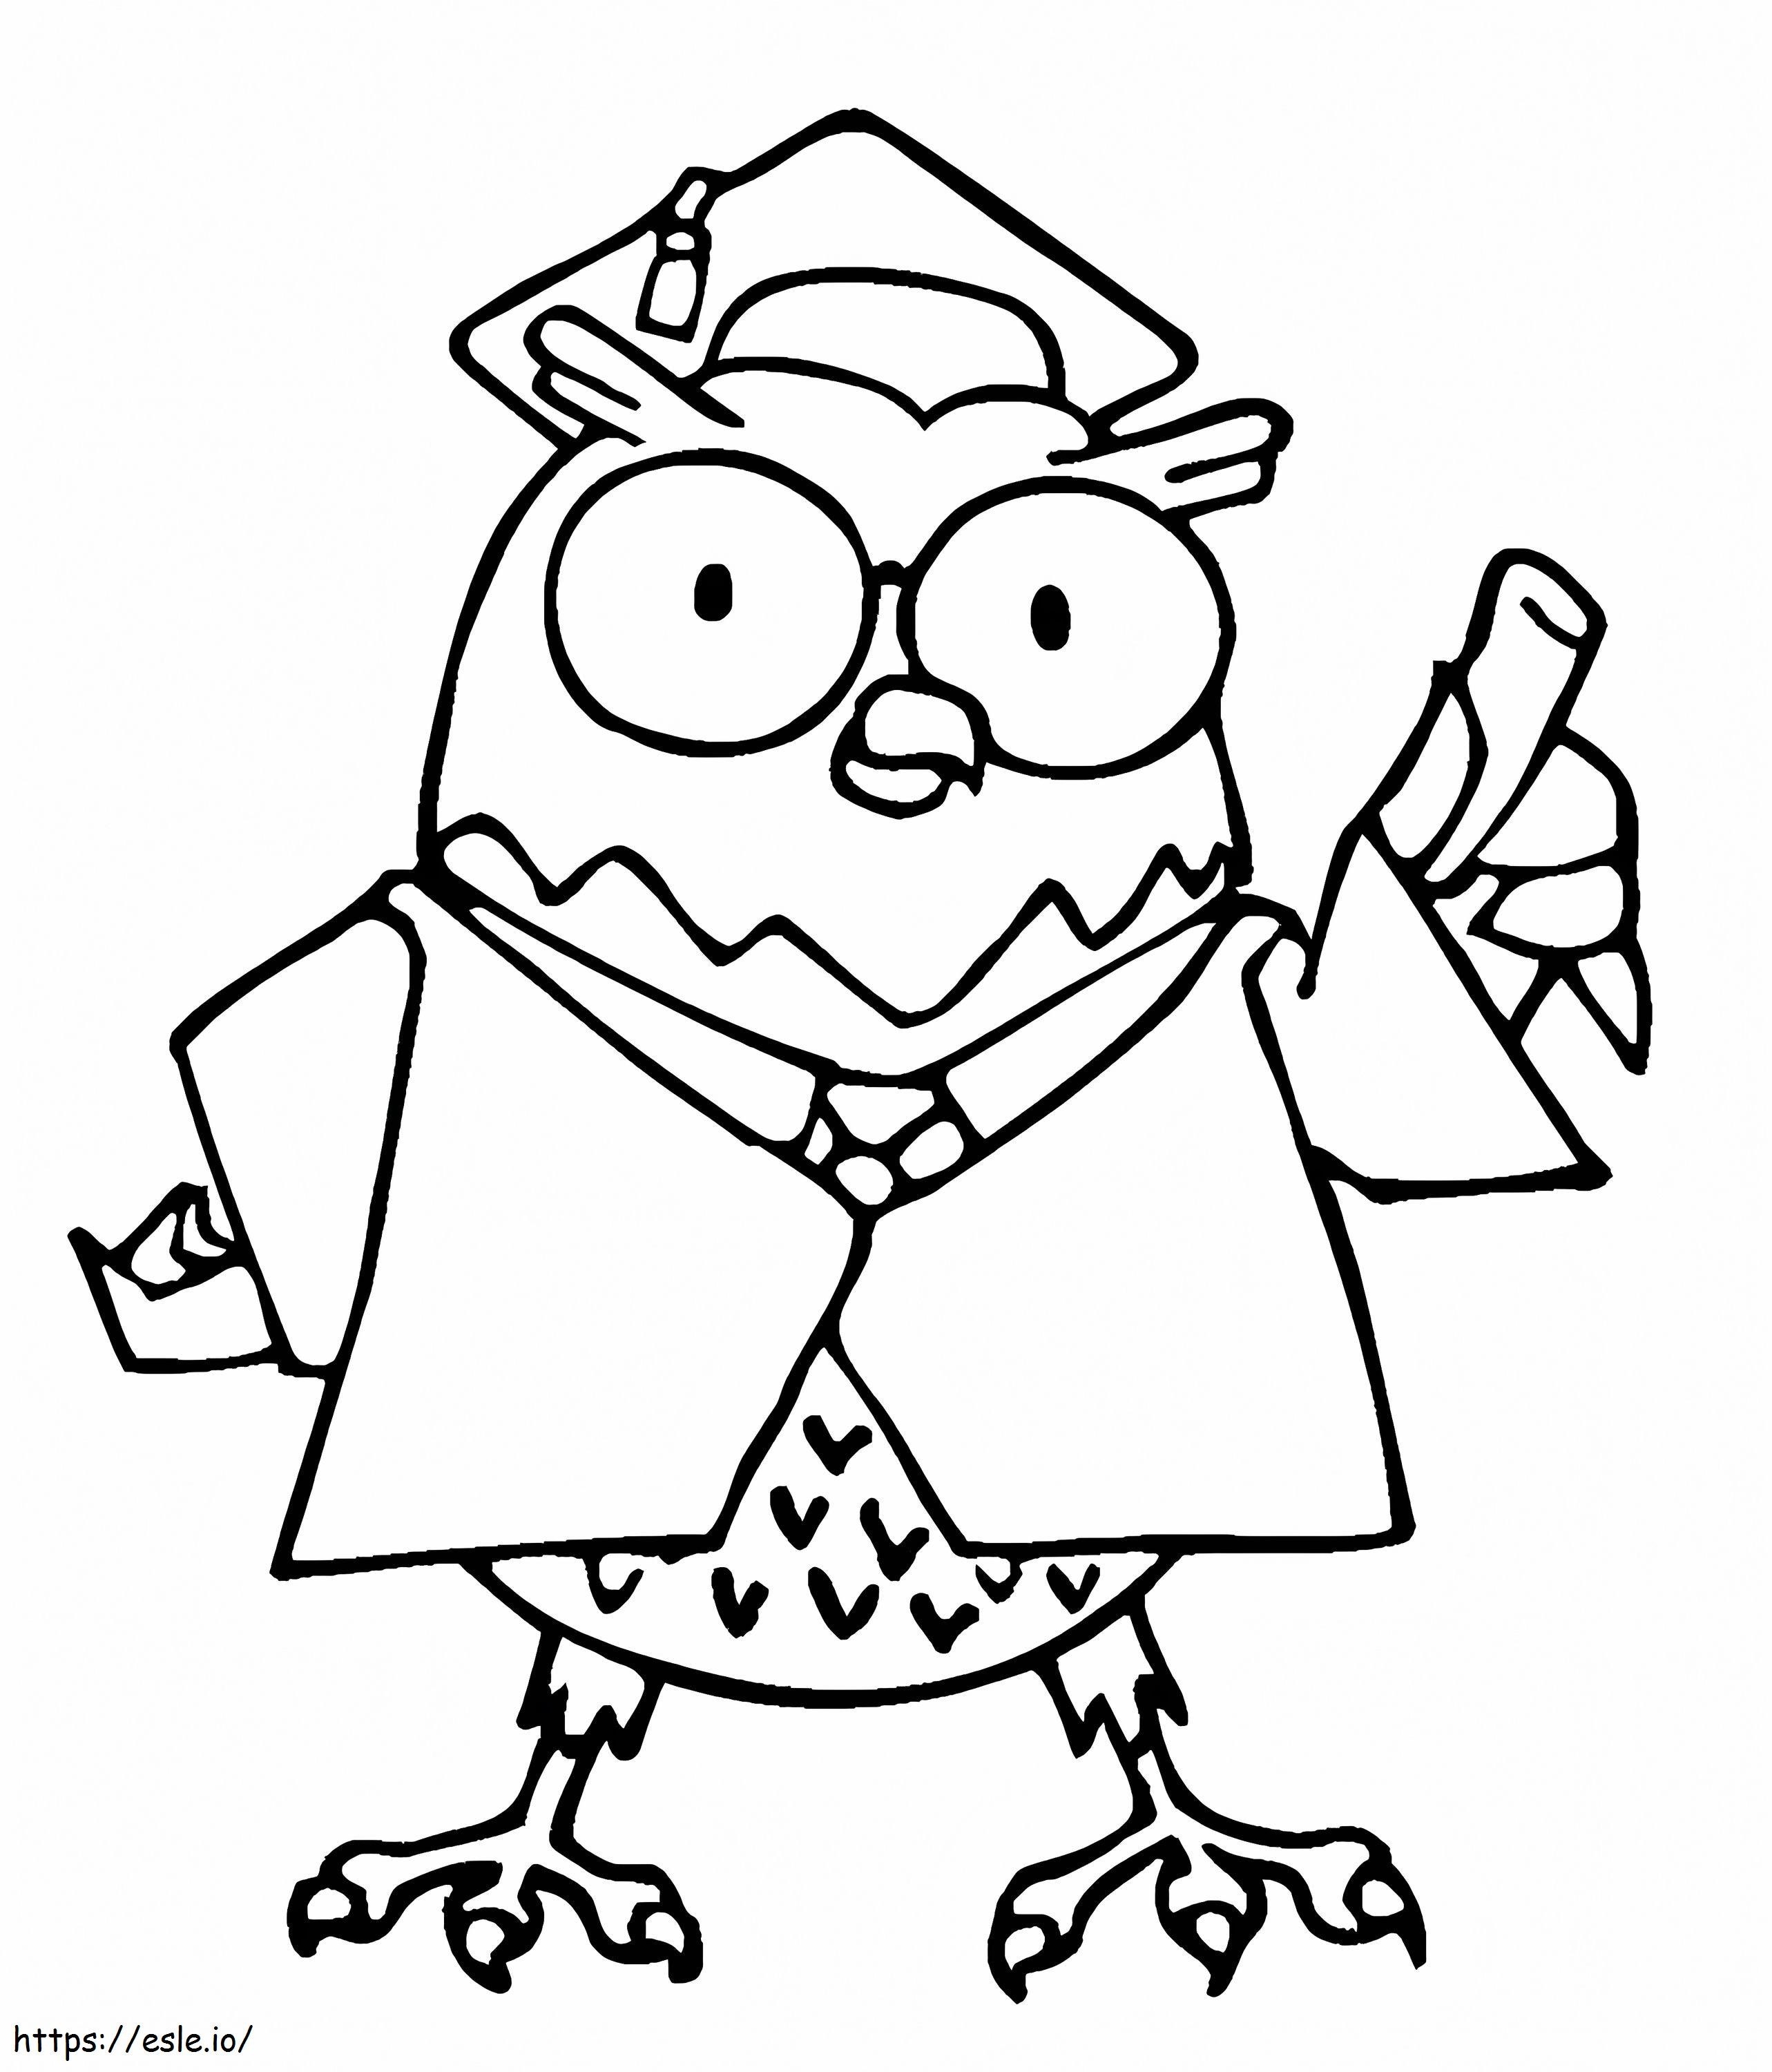 Graduation Owl Mold 1 coloring page